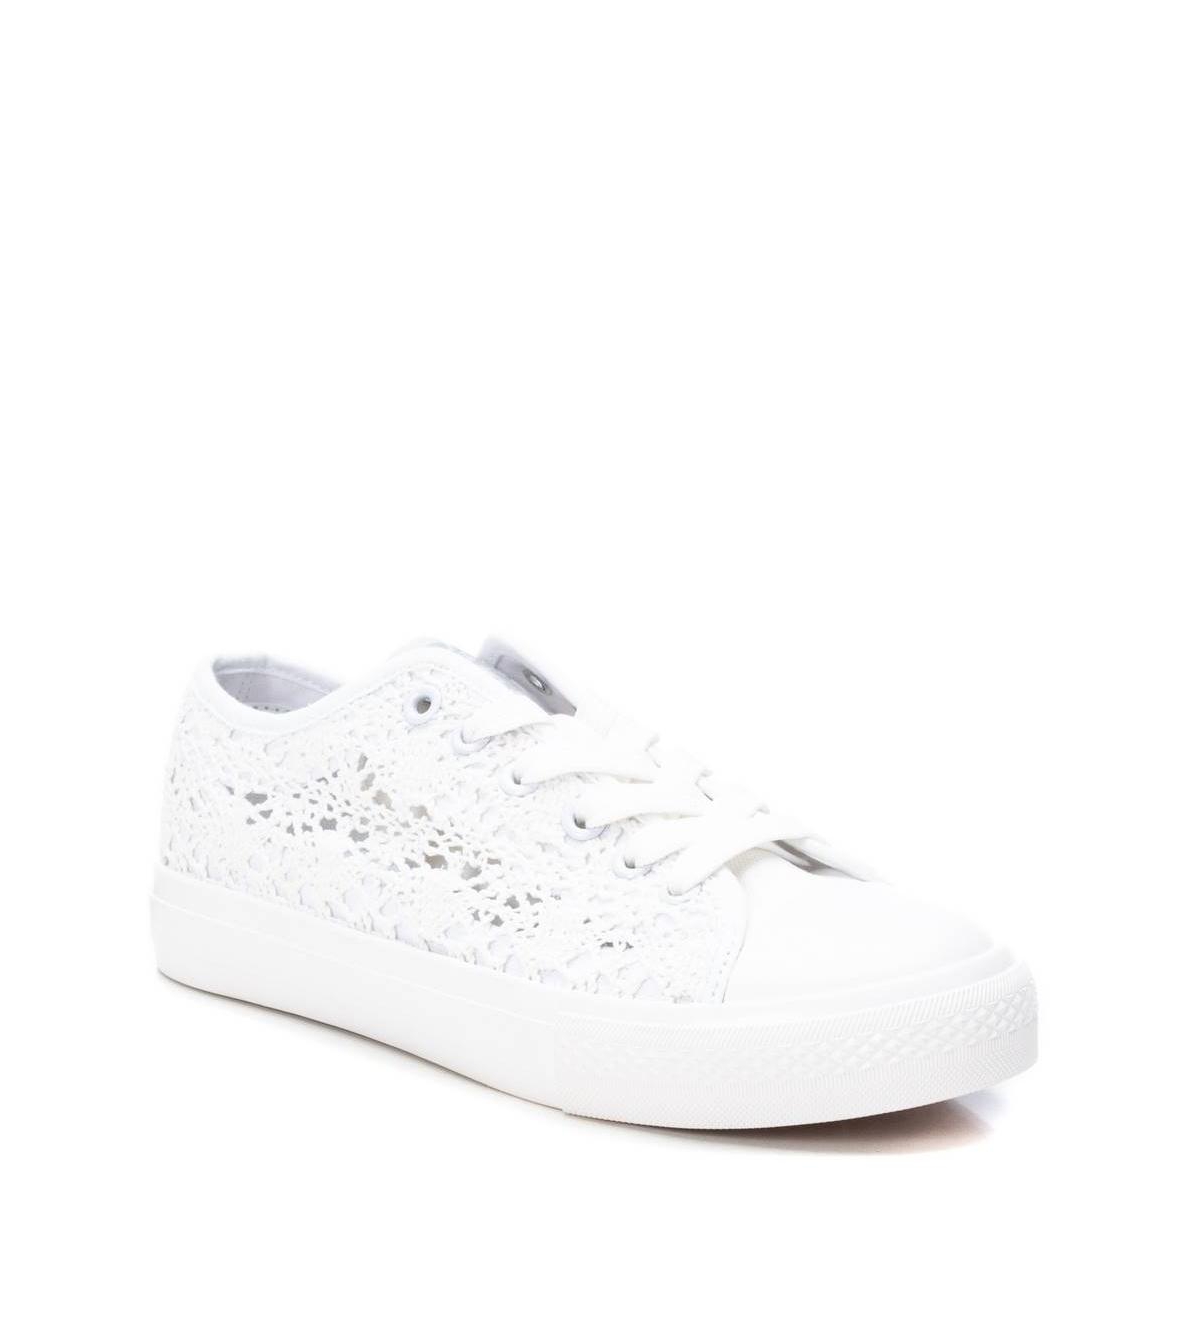 Women's Crochet Lace-Up Sneakers By Xti - White